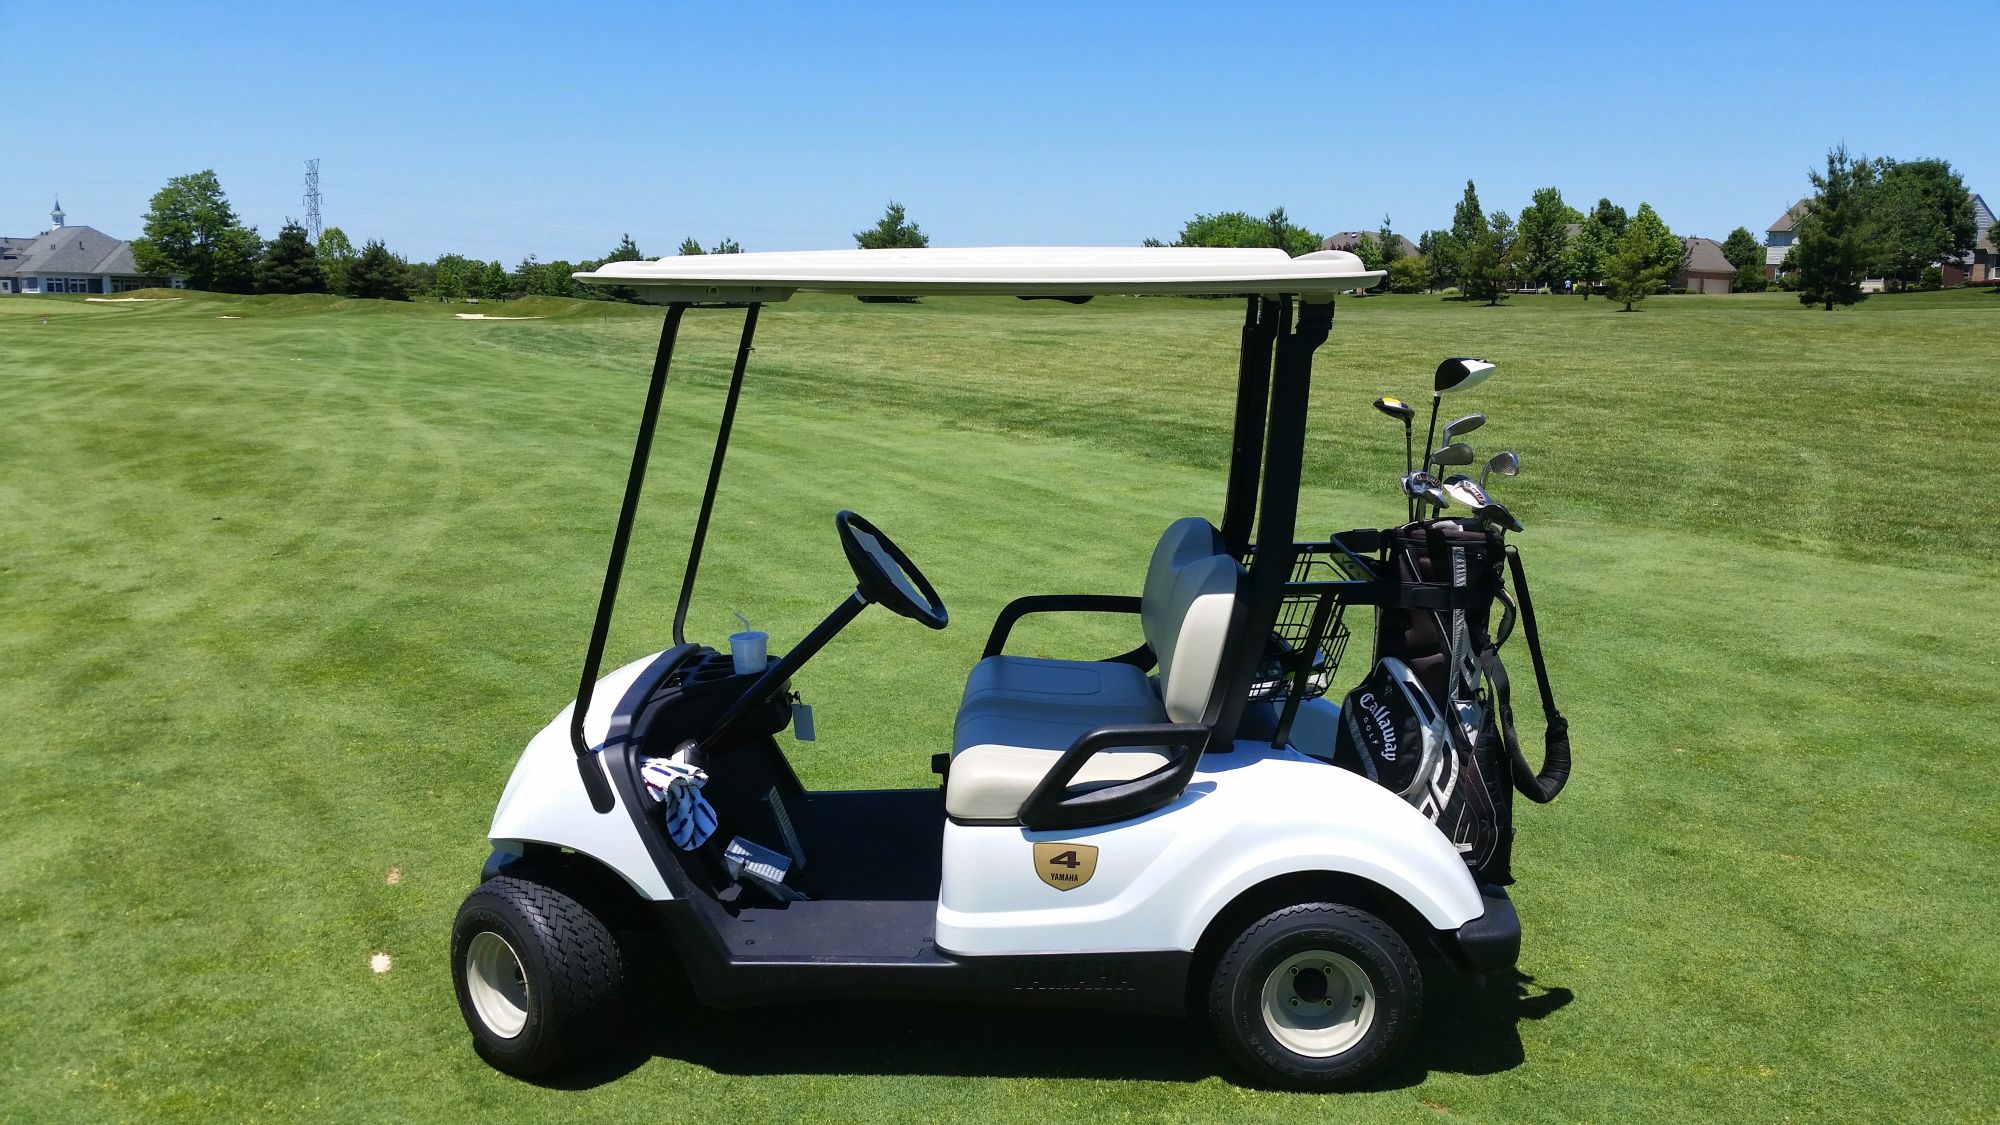 Reasons to Buy a Golf Cart Instead of Renting